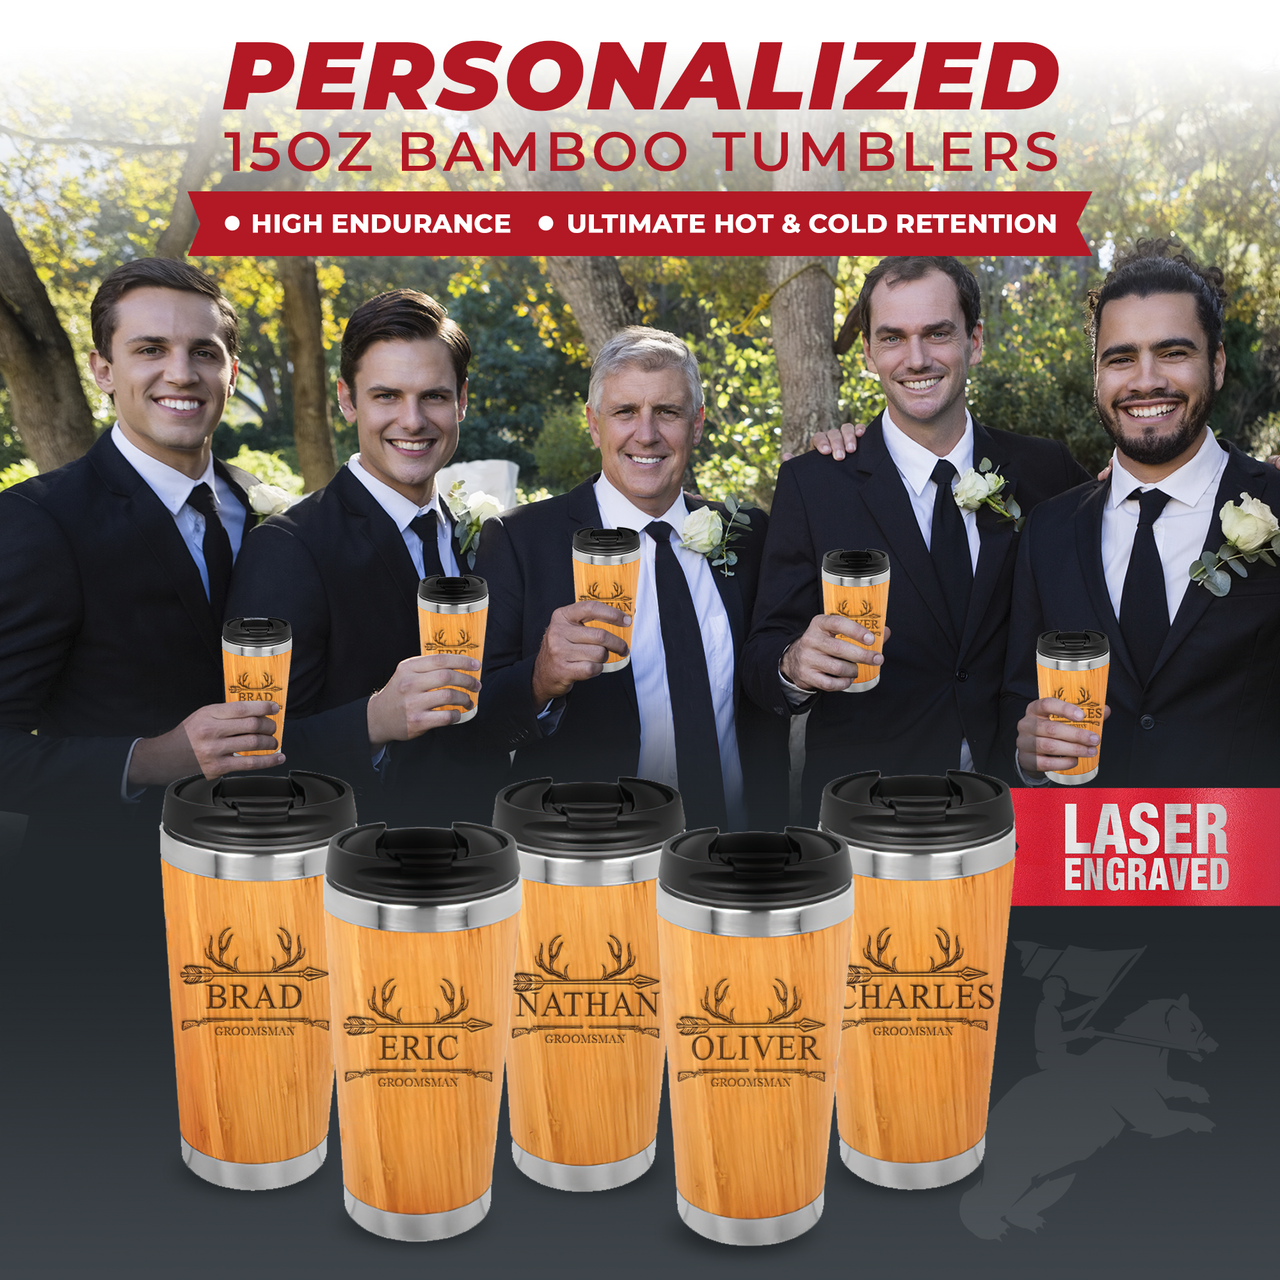 Memorable Groomsman Gifts - Personalized Presents to Ask Your Groomsmen